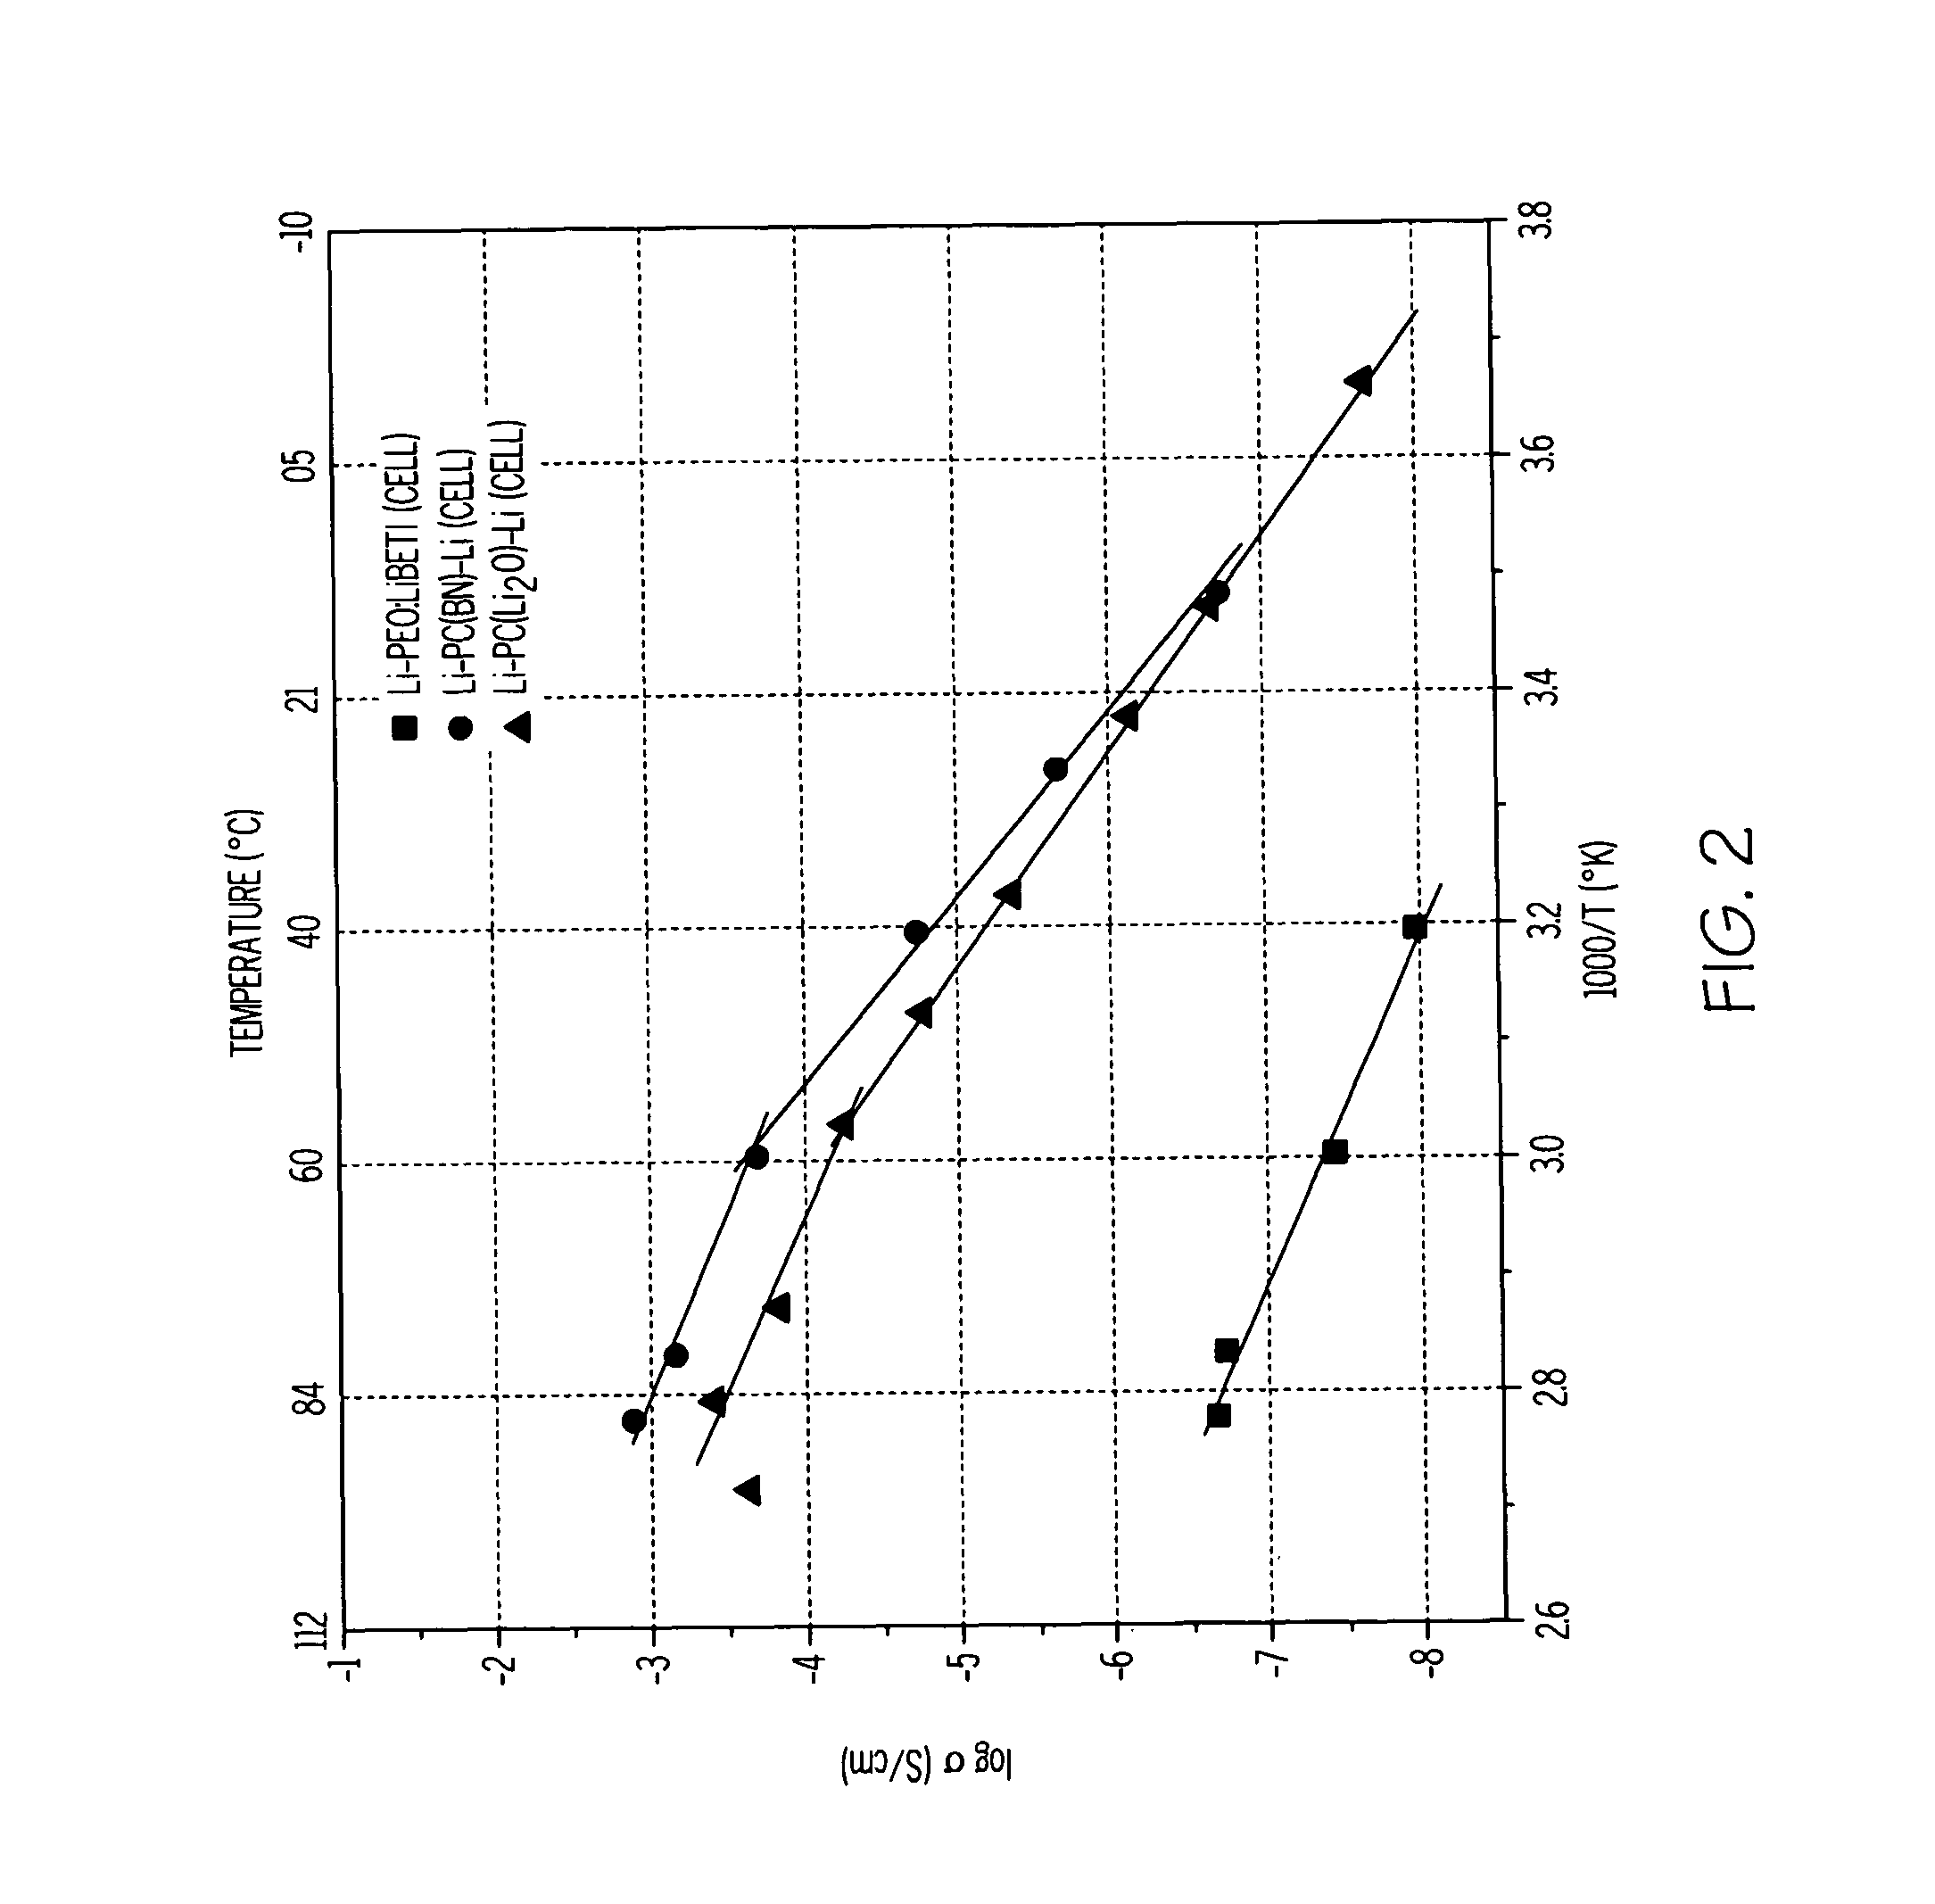 Lithium-air cells incorporating solid electrolytes having enhanced ionic transport and catalytic activity